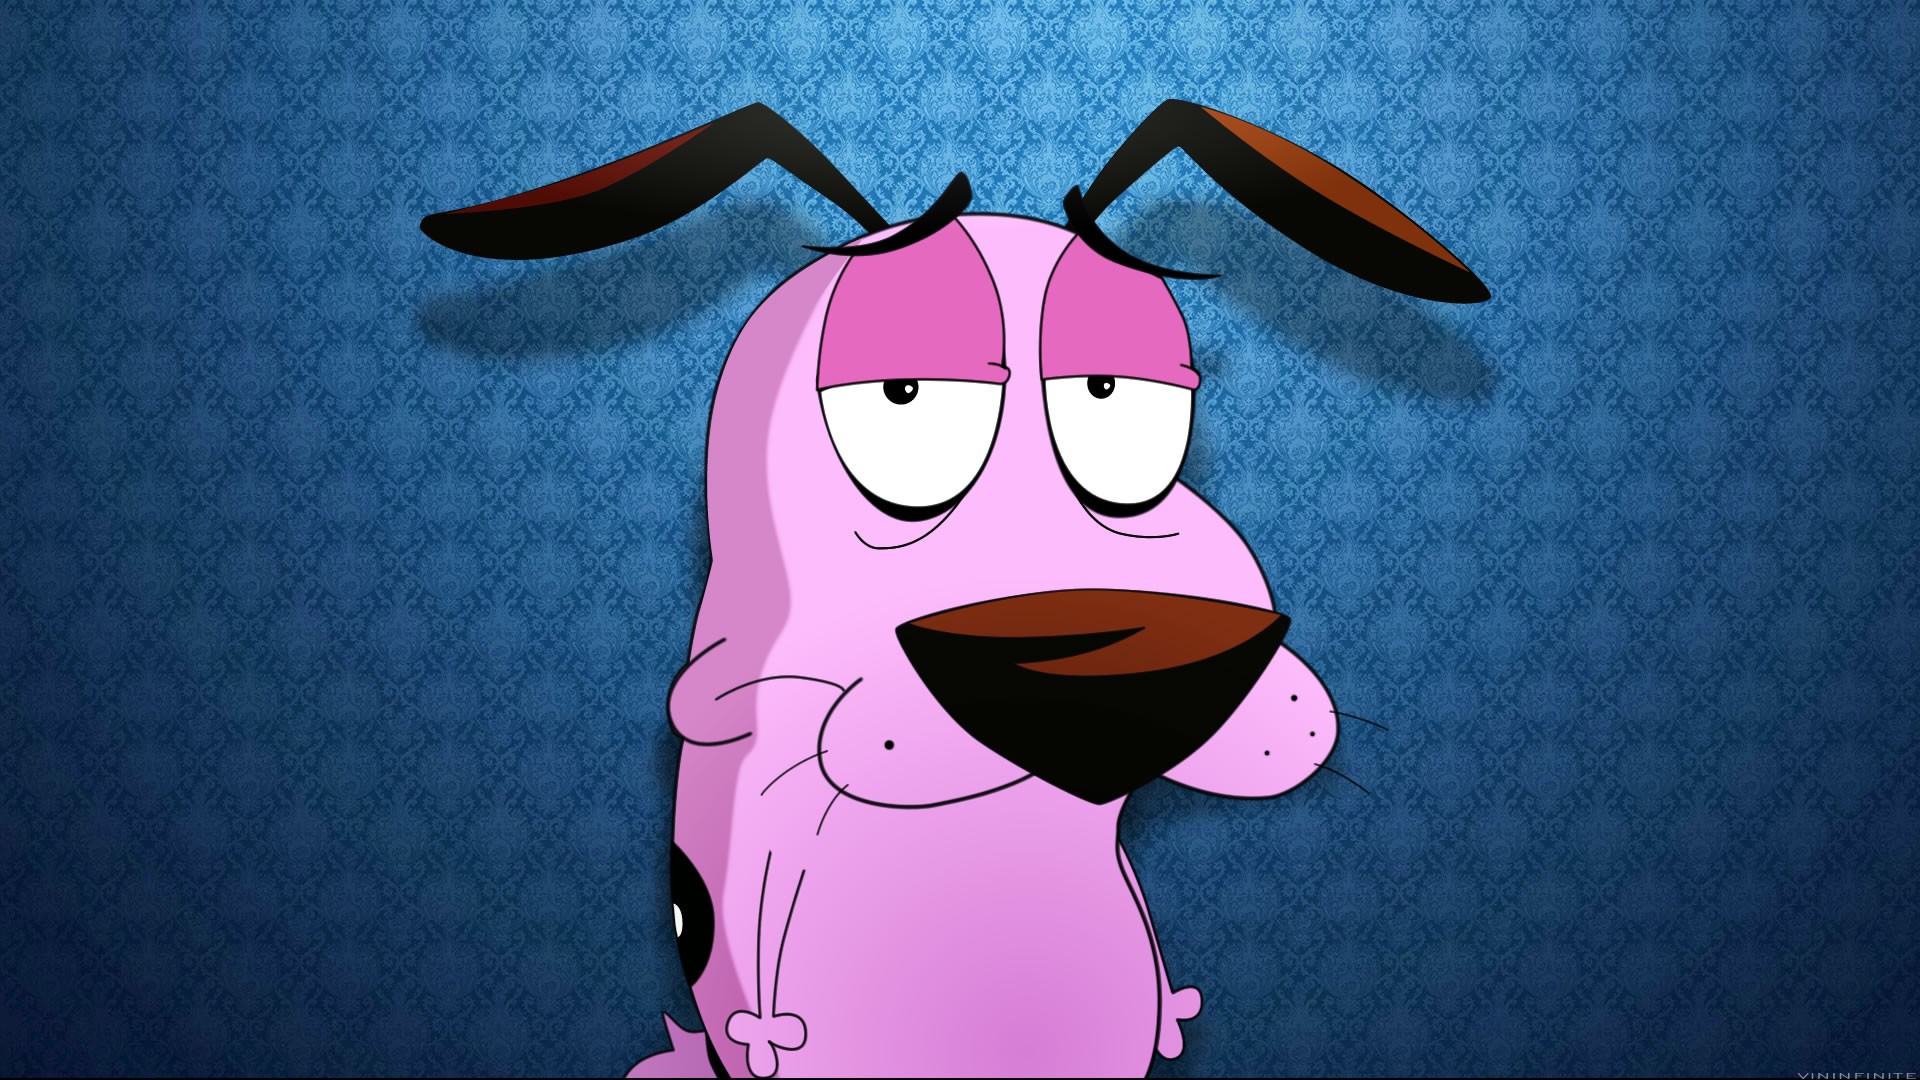 Courage The Cowardly Dog 1920x1080